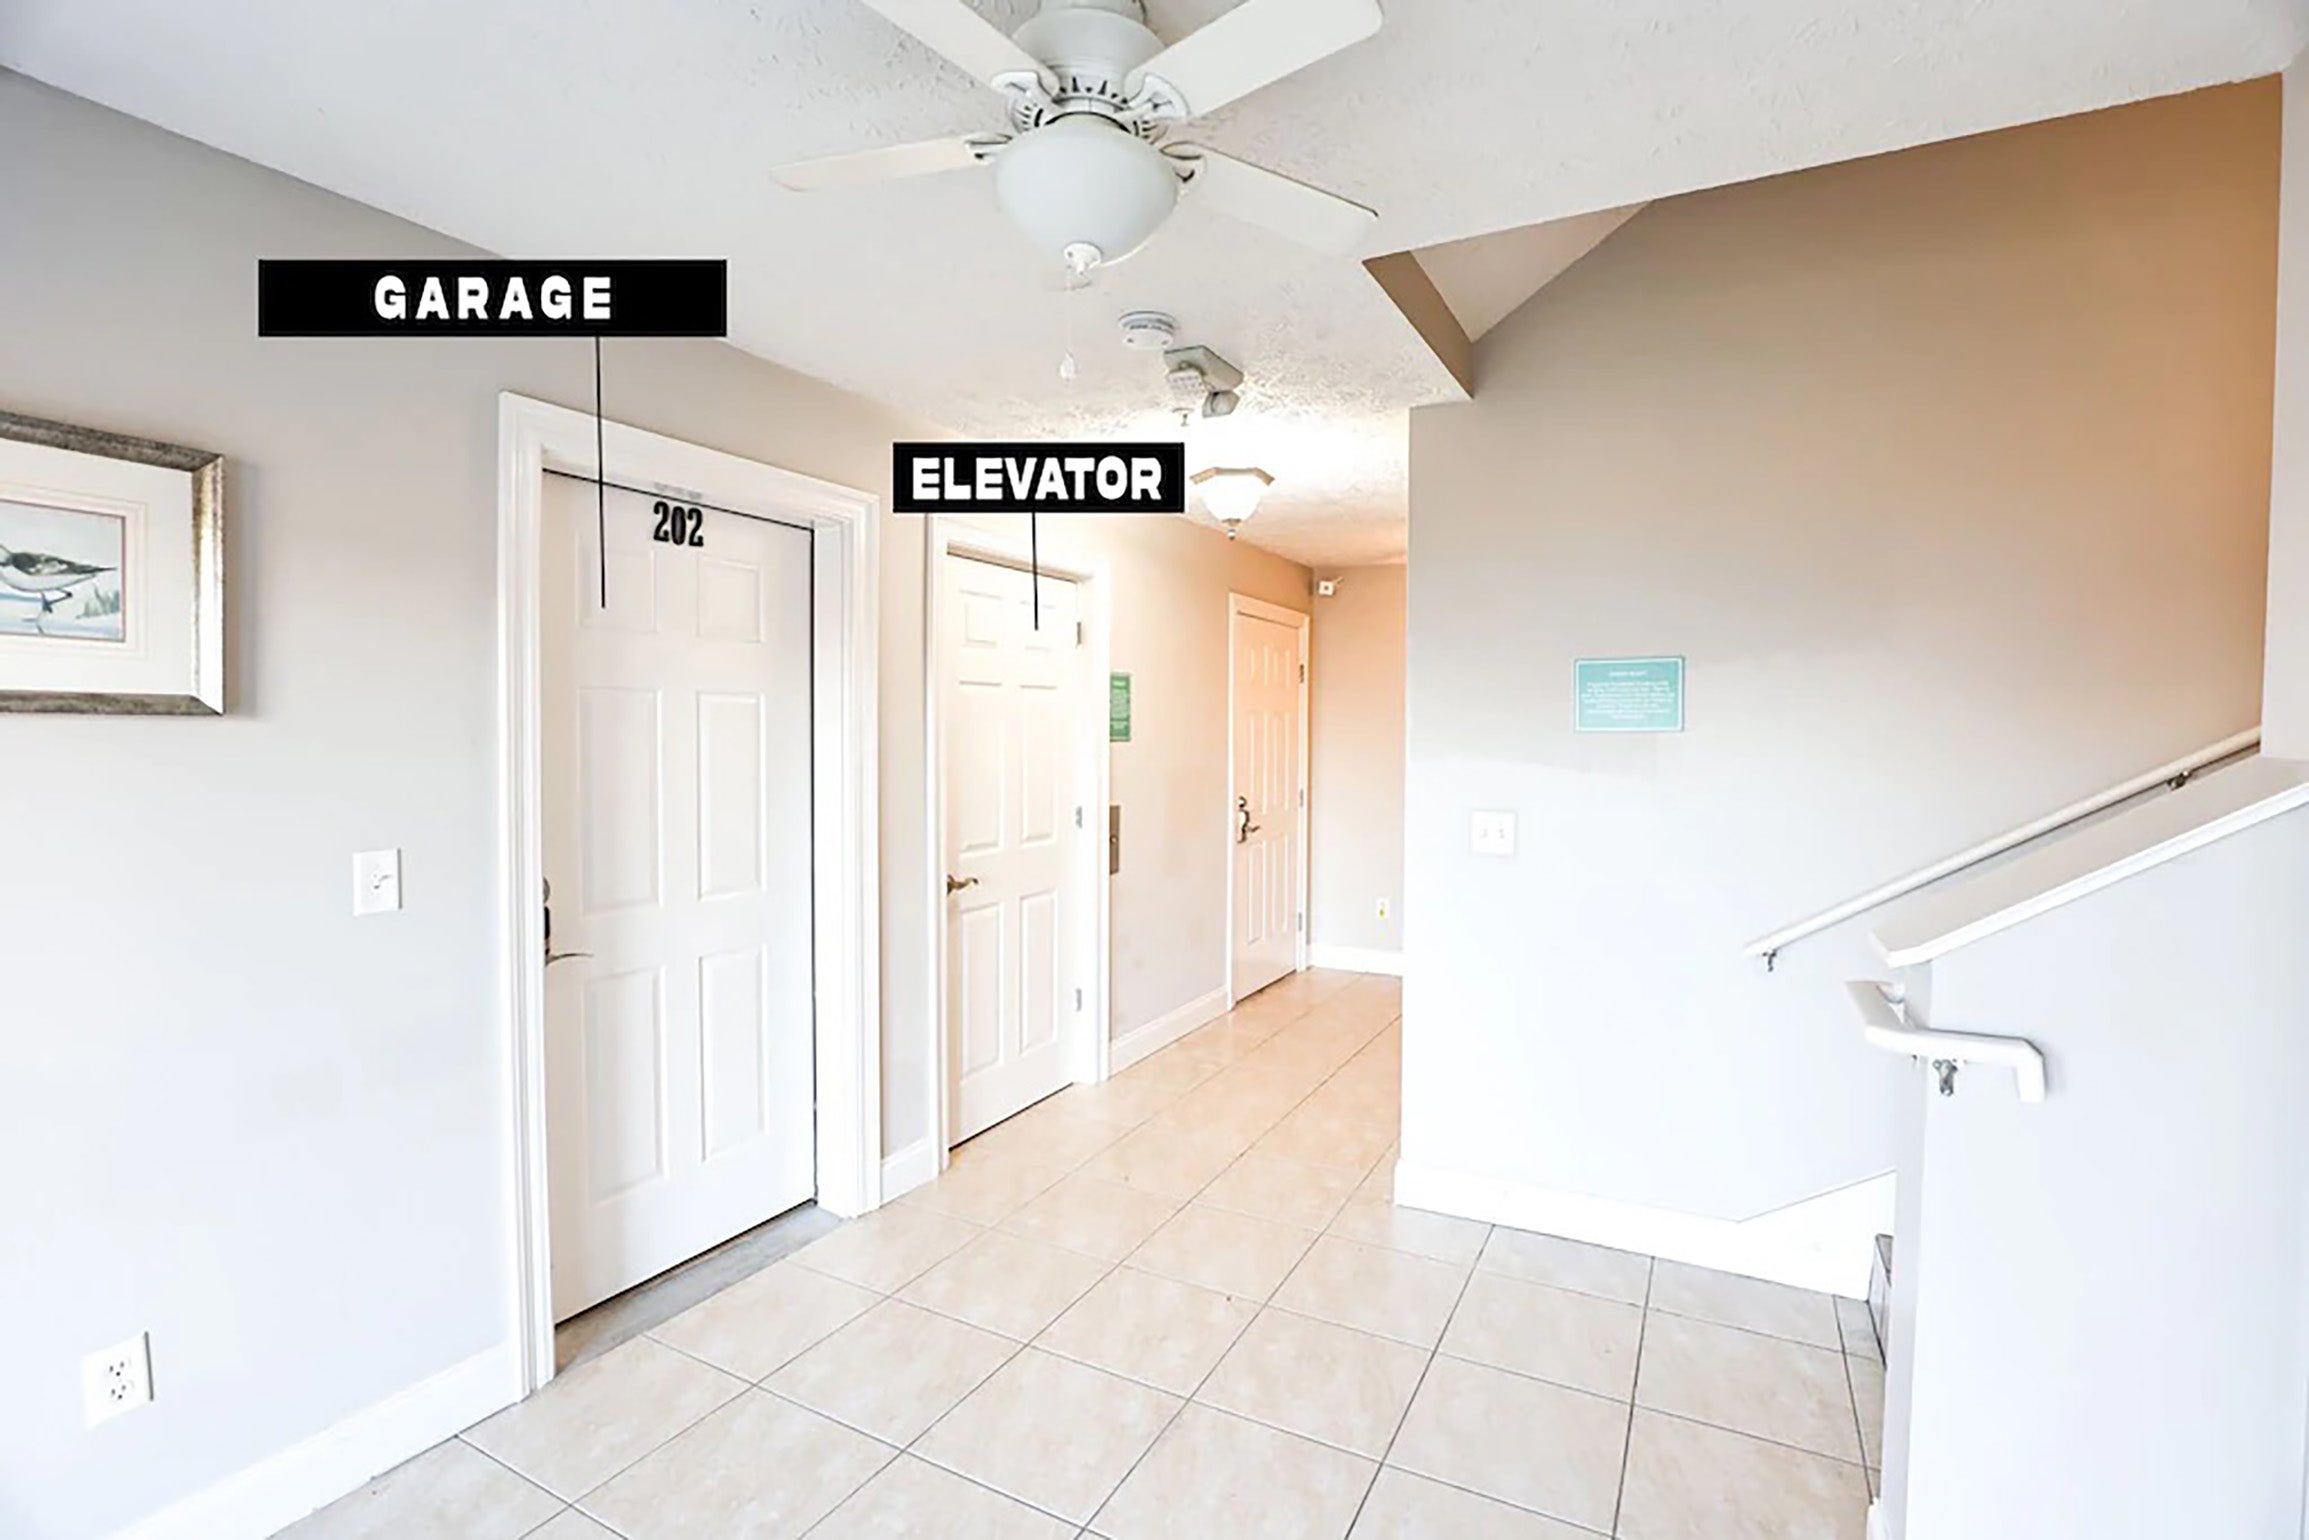 Garage access and elevator